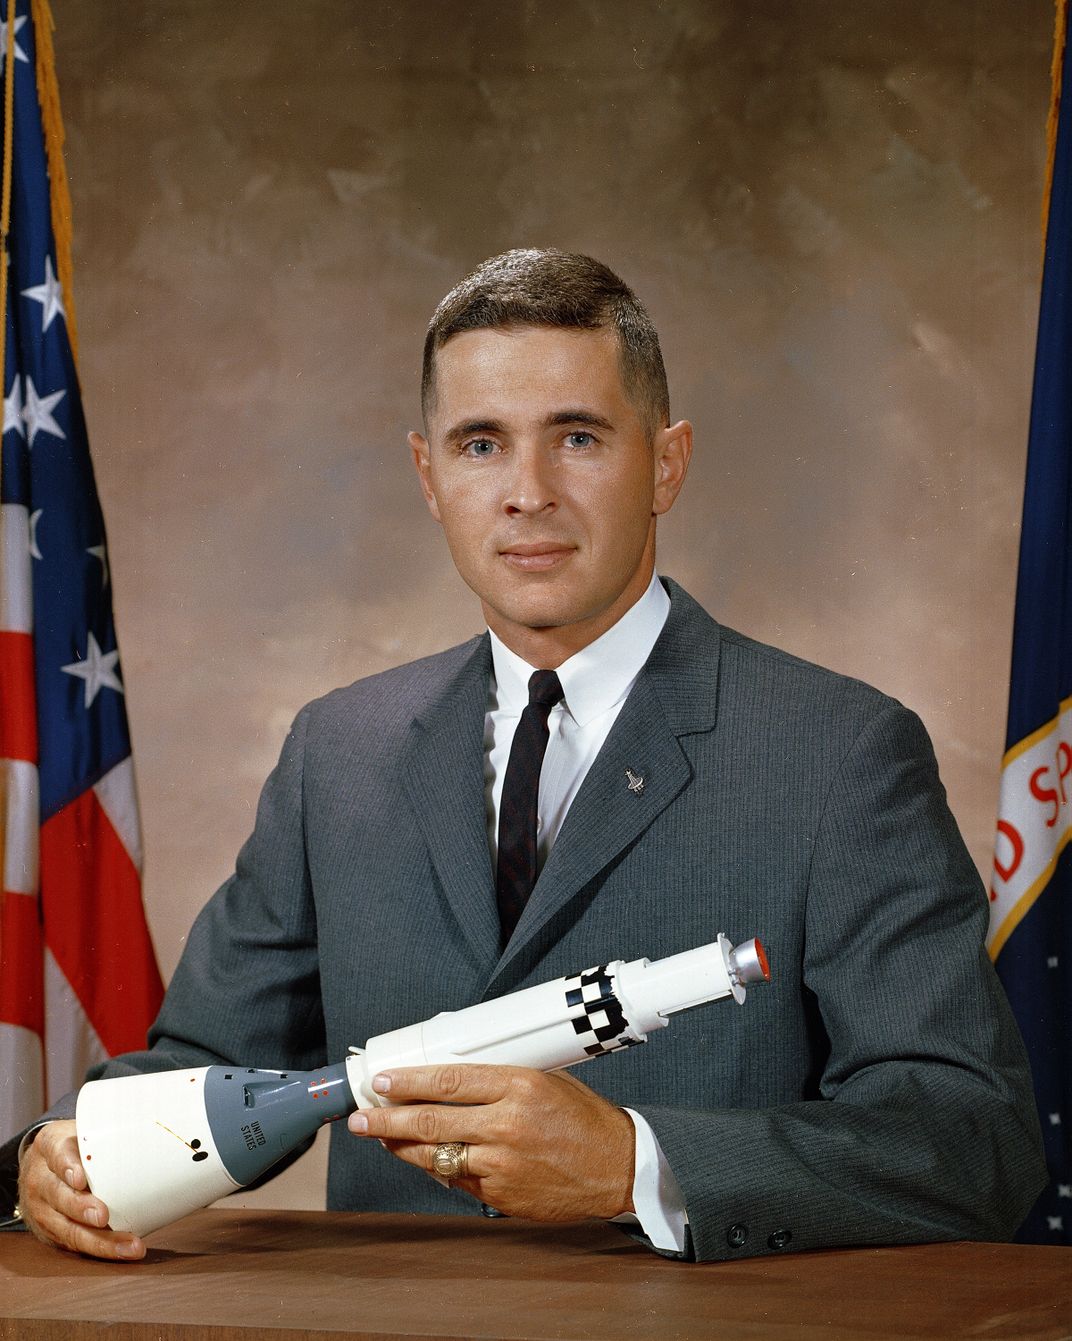 Astronaut William A. Anders, photographed in 1968